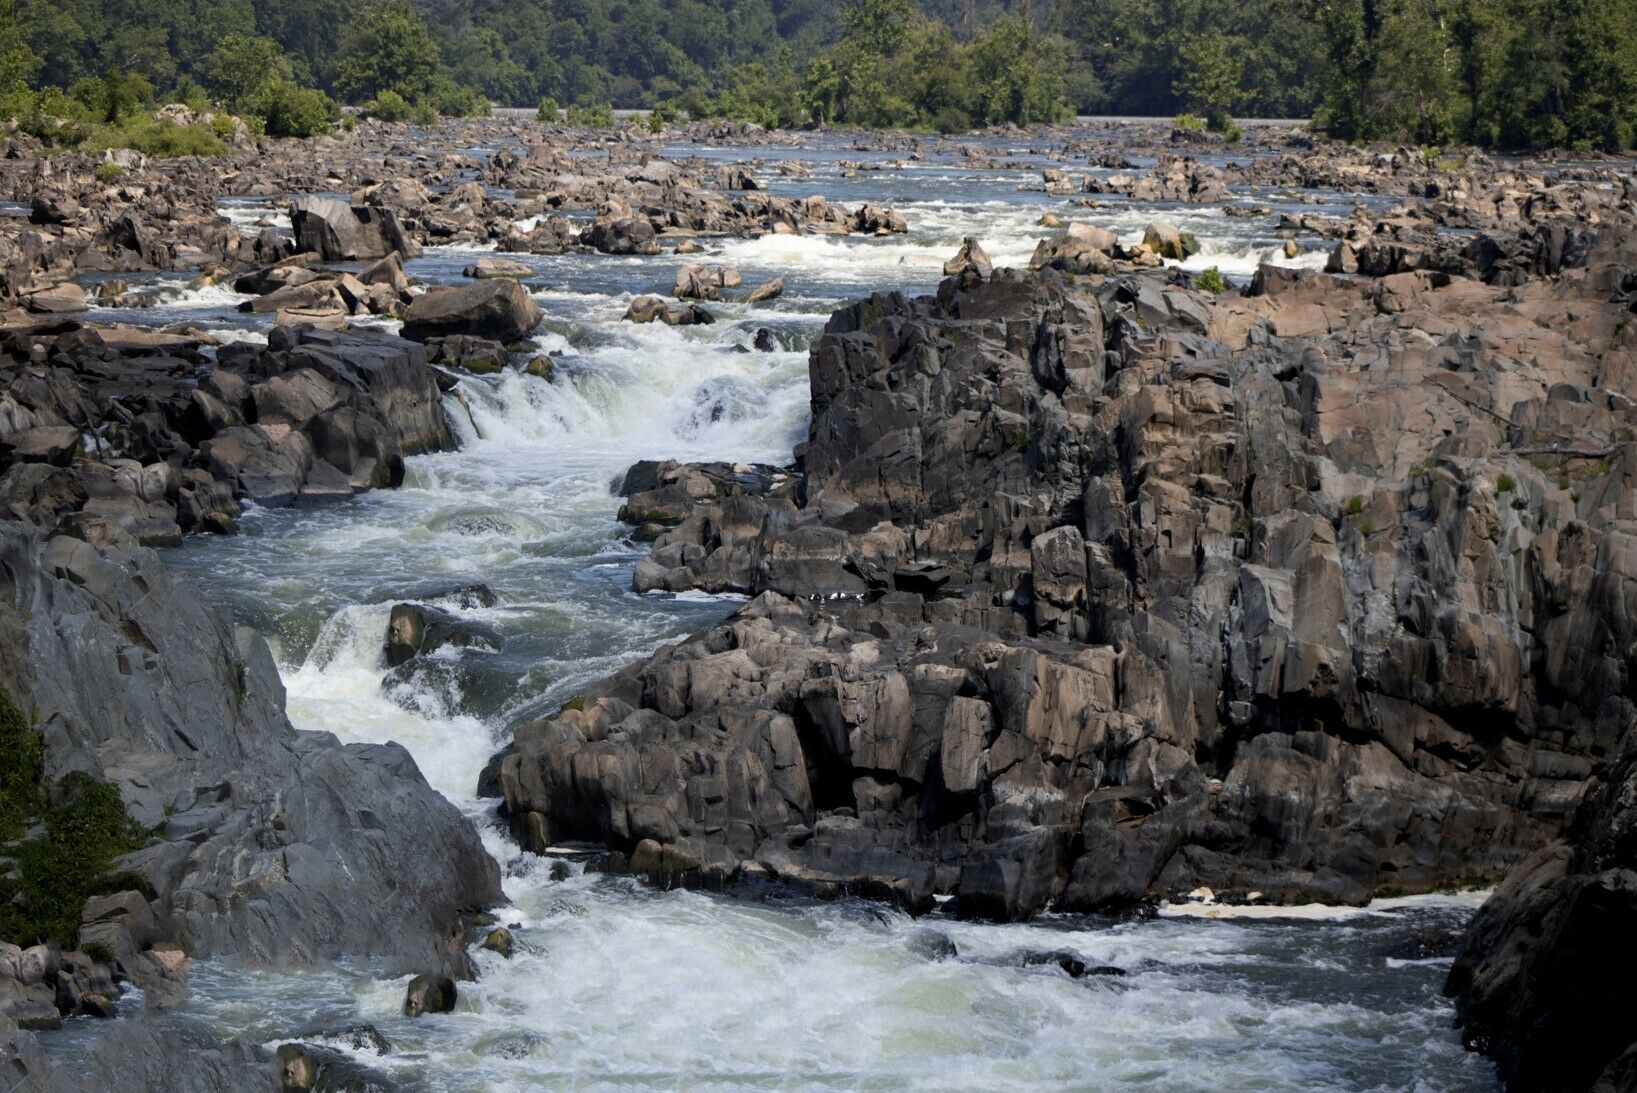 "Grand Great Falls" by Athena Goines, taken at Great Falls National Park